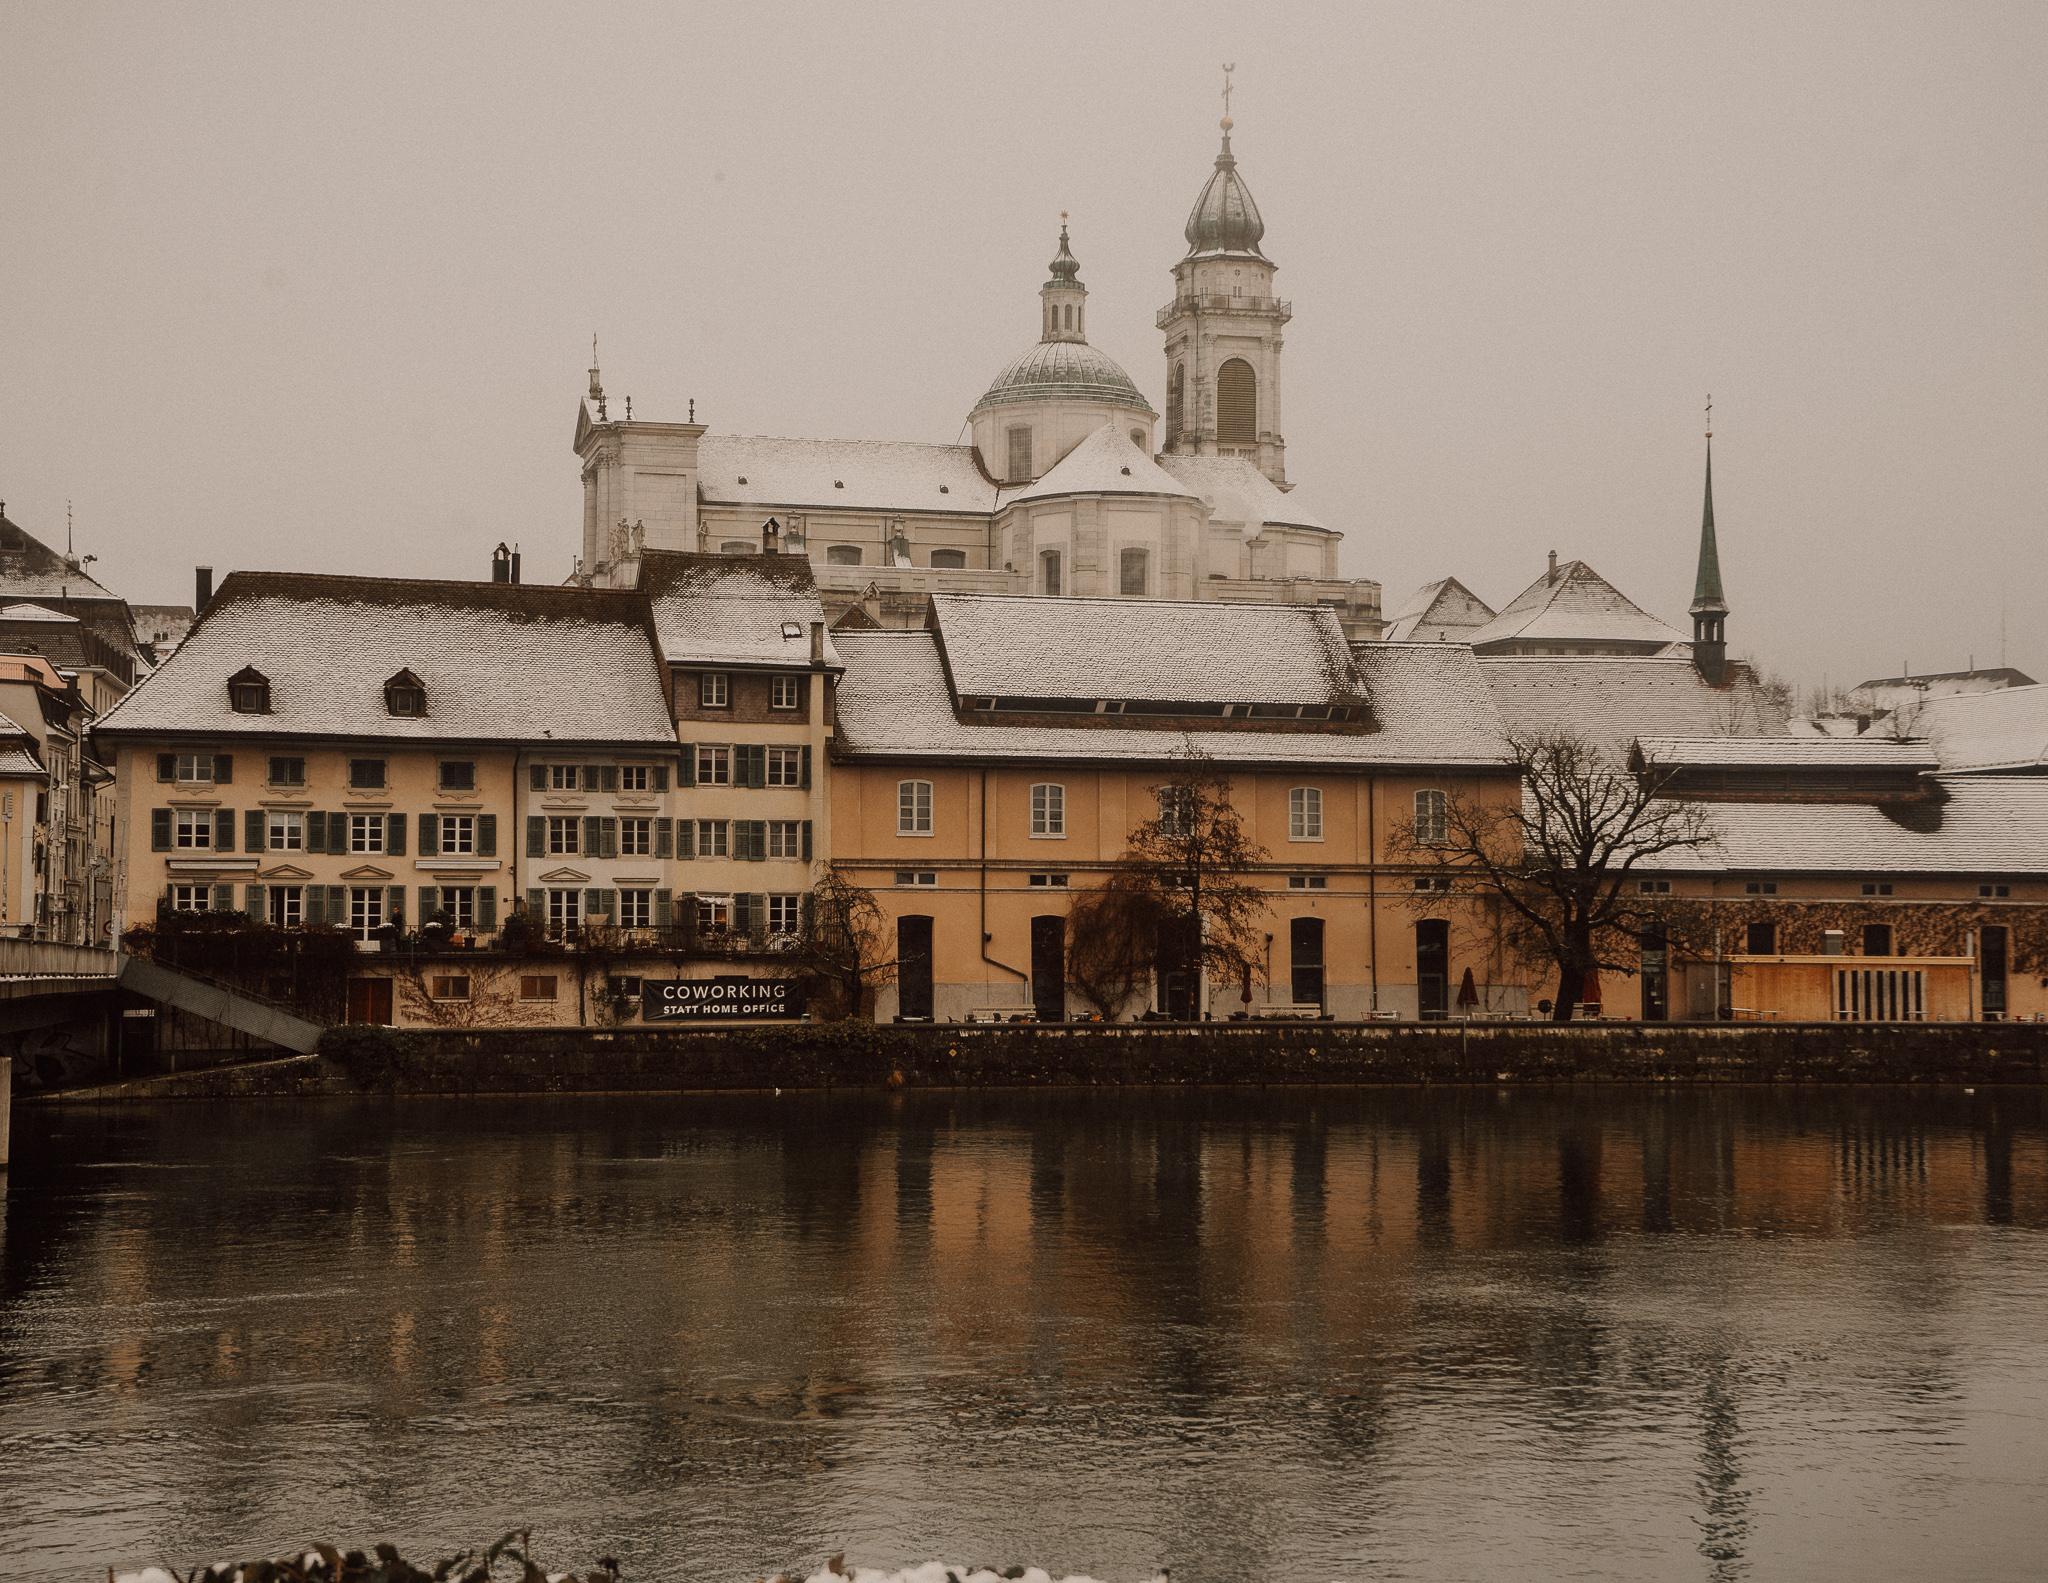 A view of Solothurn village in Switzerland across the river with snow on the buildings roofs on a cloudy day